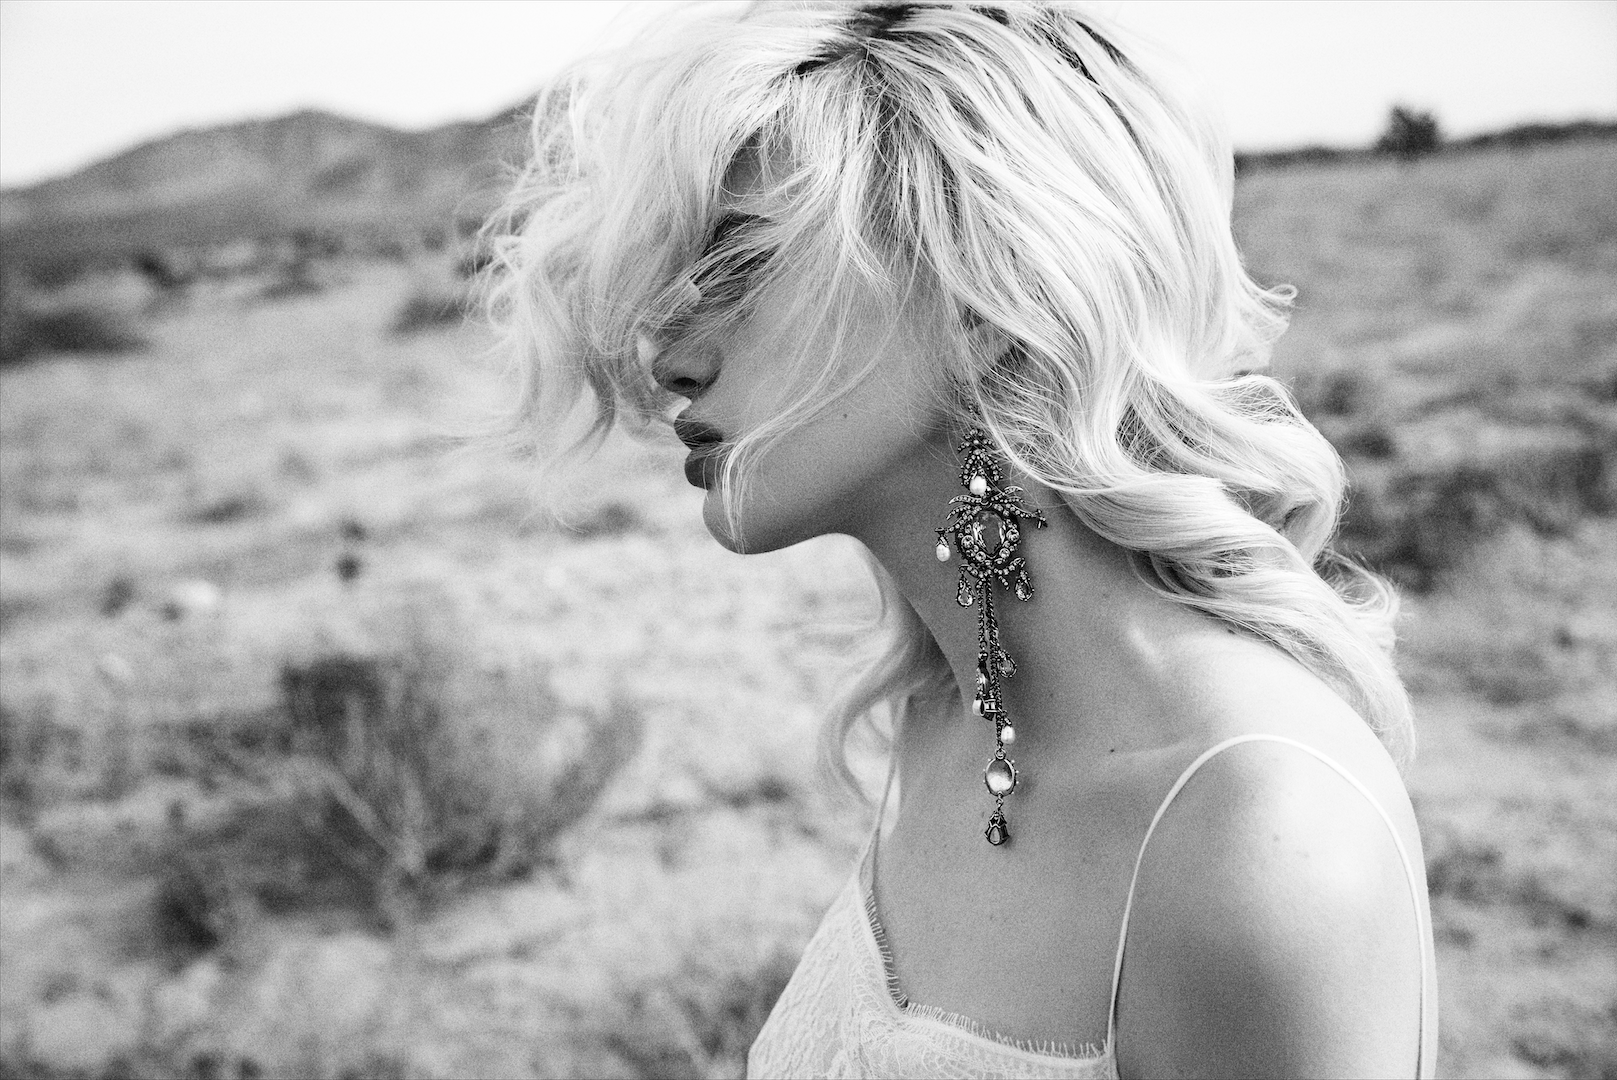 Paul Sinclaire | Vogue Japan: Cowgirl of the desert | 5